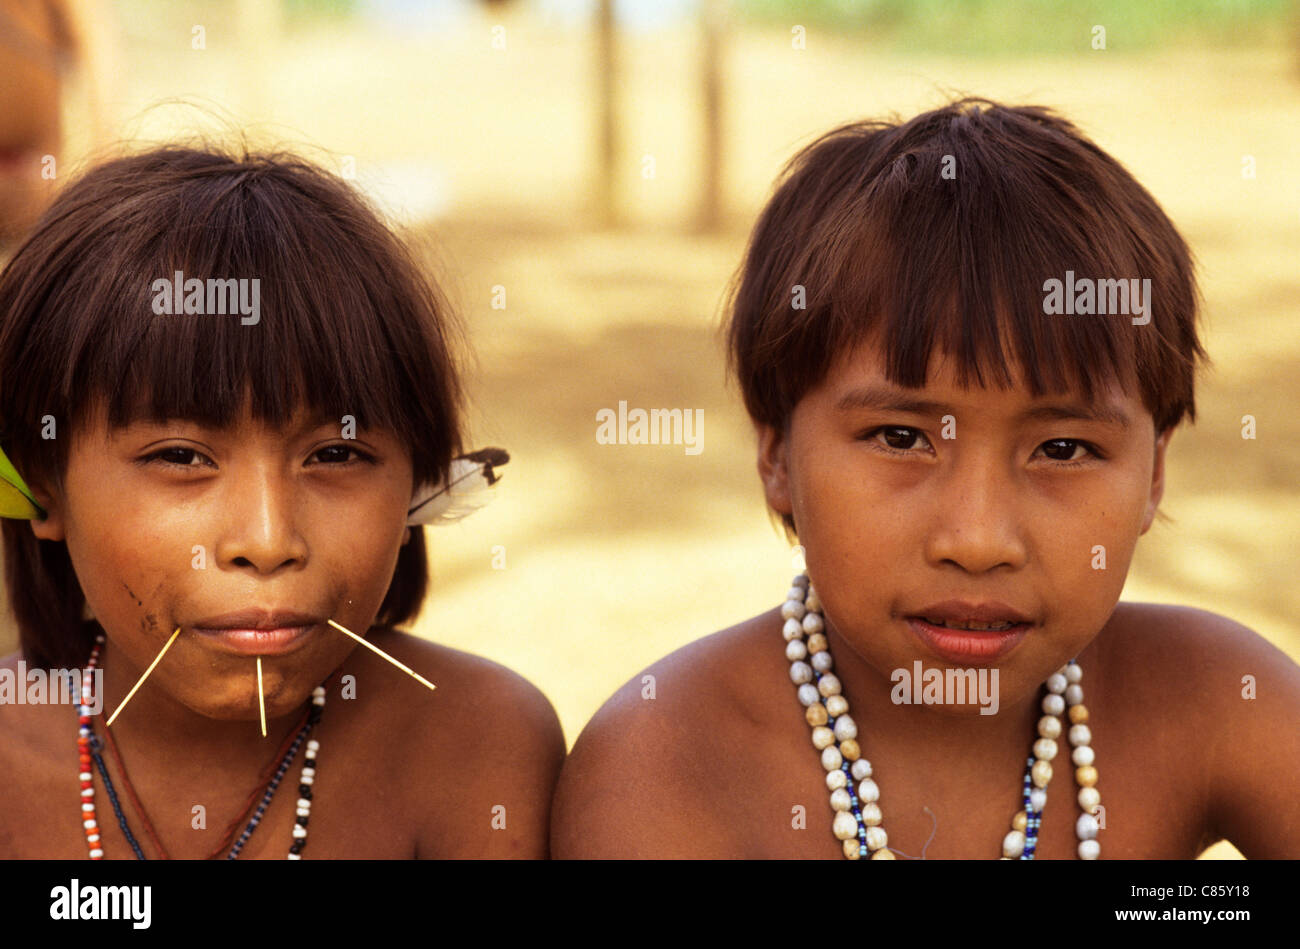 Brazil. Portrait of two Yanomami Indian girls, showing facial decoration (piercing) and beads. Stock Photo